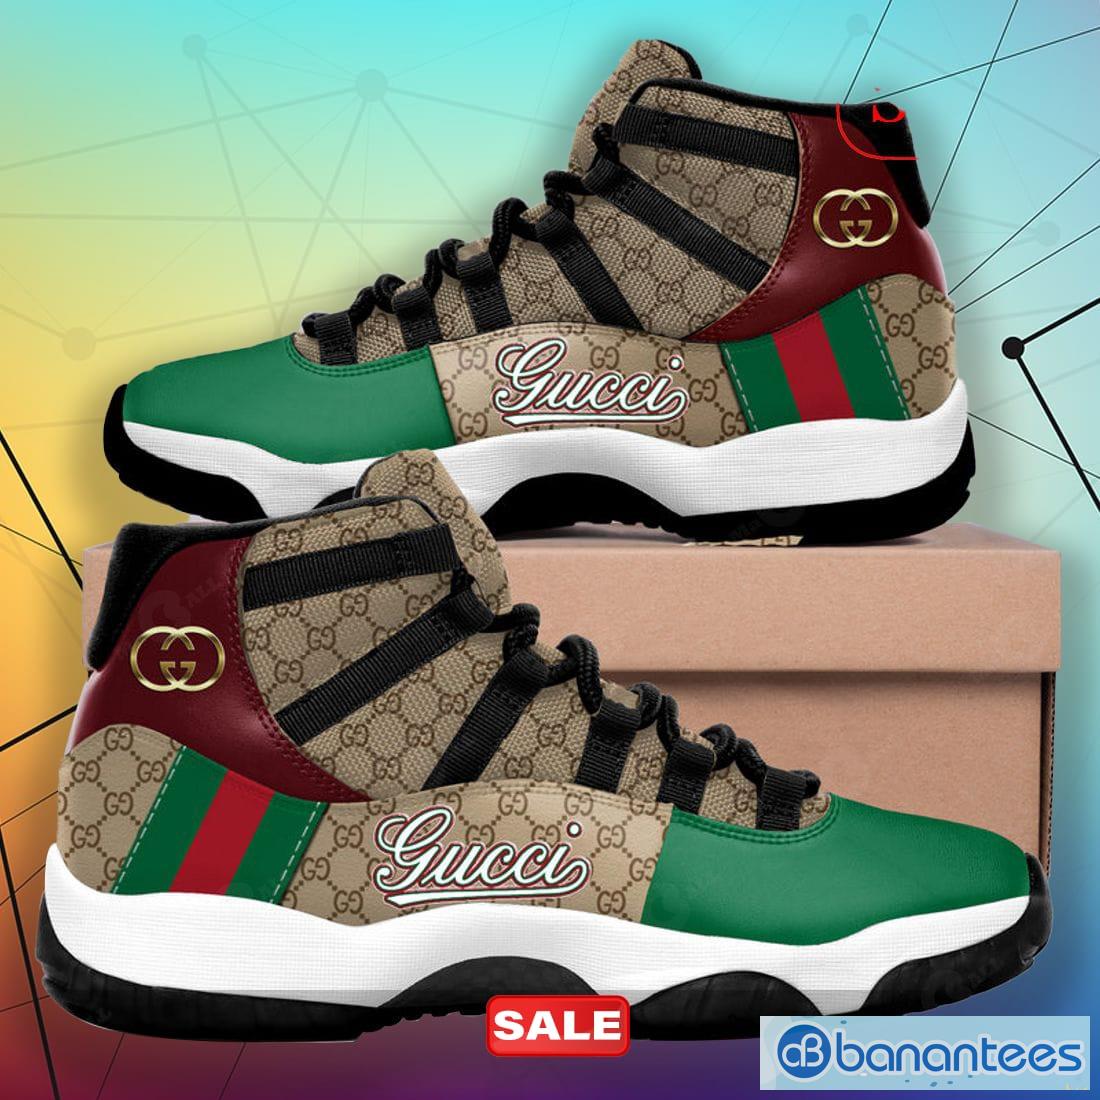 Gucci leather shoes in 2023  Gucci men shoes, Gucci leather shoes